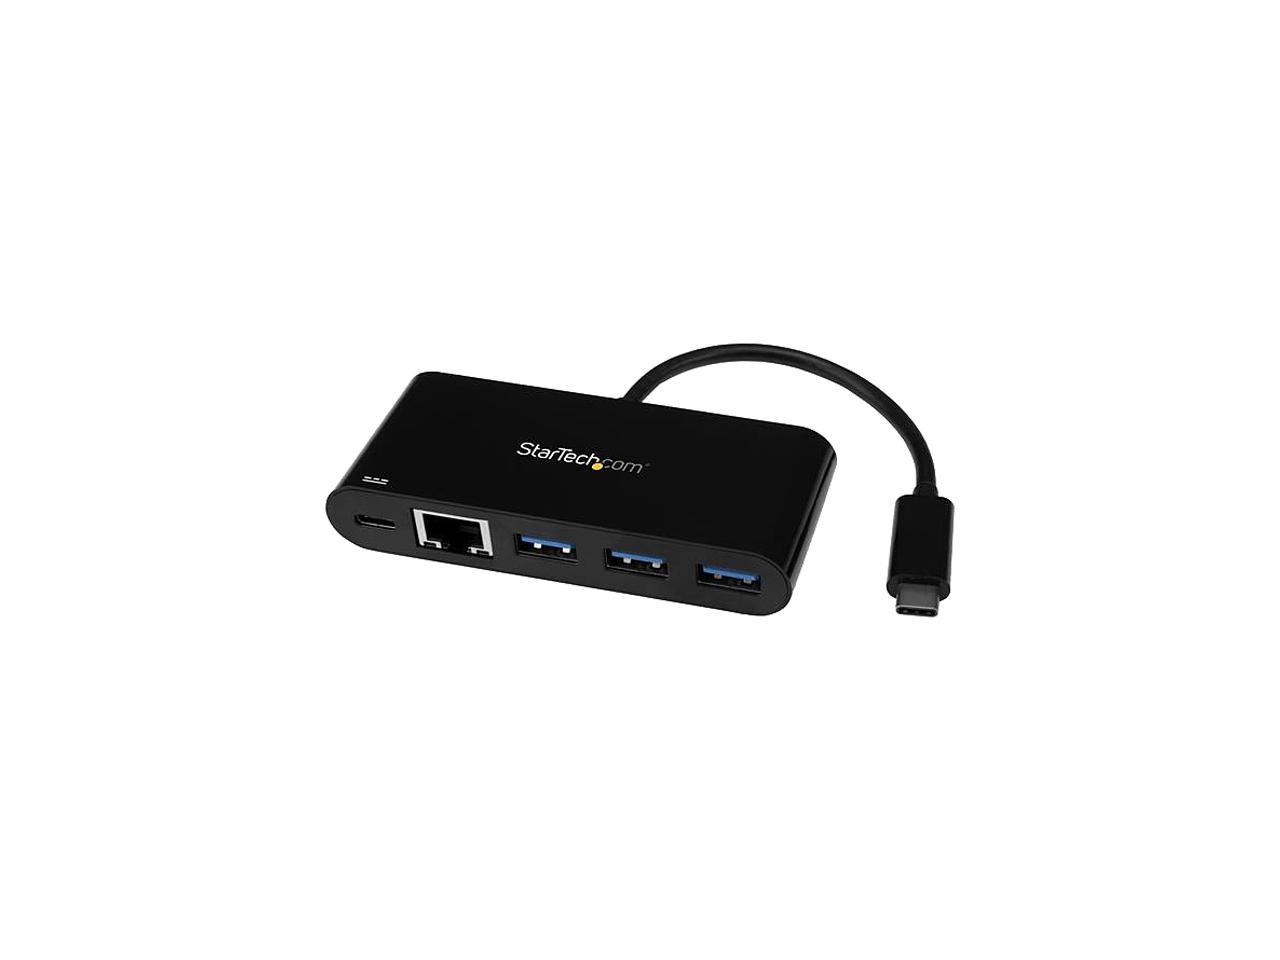 StarTech HB30C3AGEPD 3 Port USB C Hub w/ GbE & PD 2.0 - USB-C to 2 x USB-A - USB 3.0 Hub - USB Port Expander - USB Port Hub w/ GbE & Power Delivery - image 1 of 5